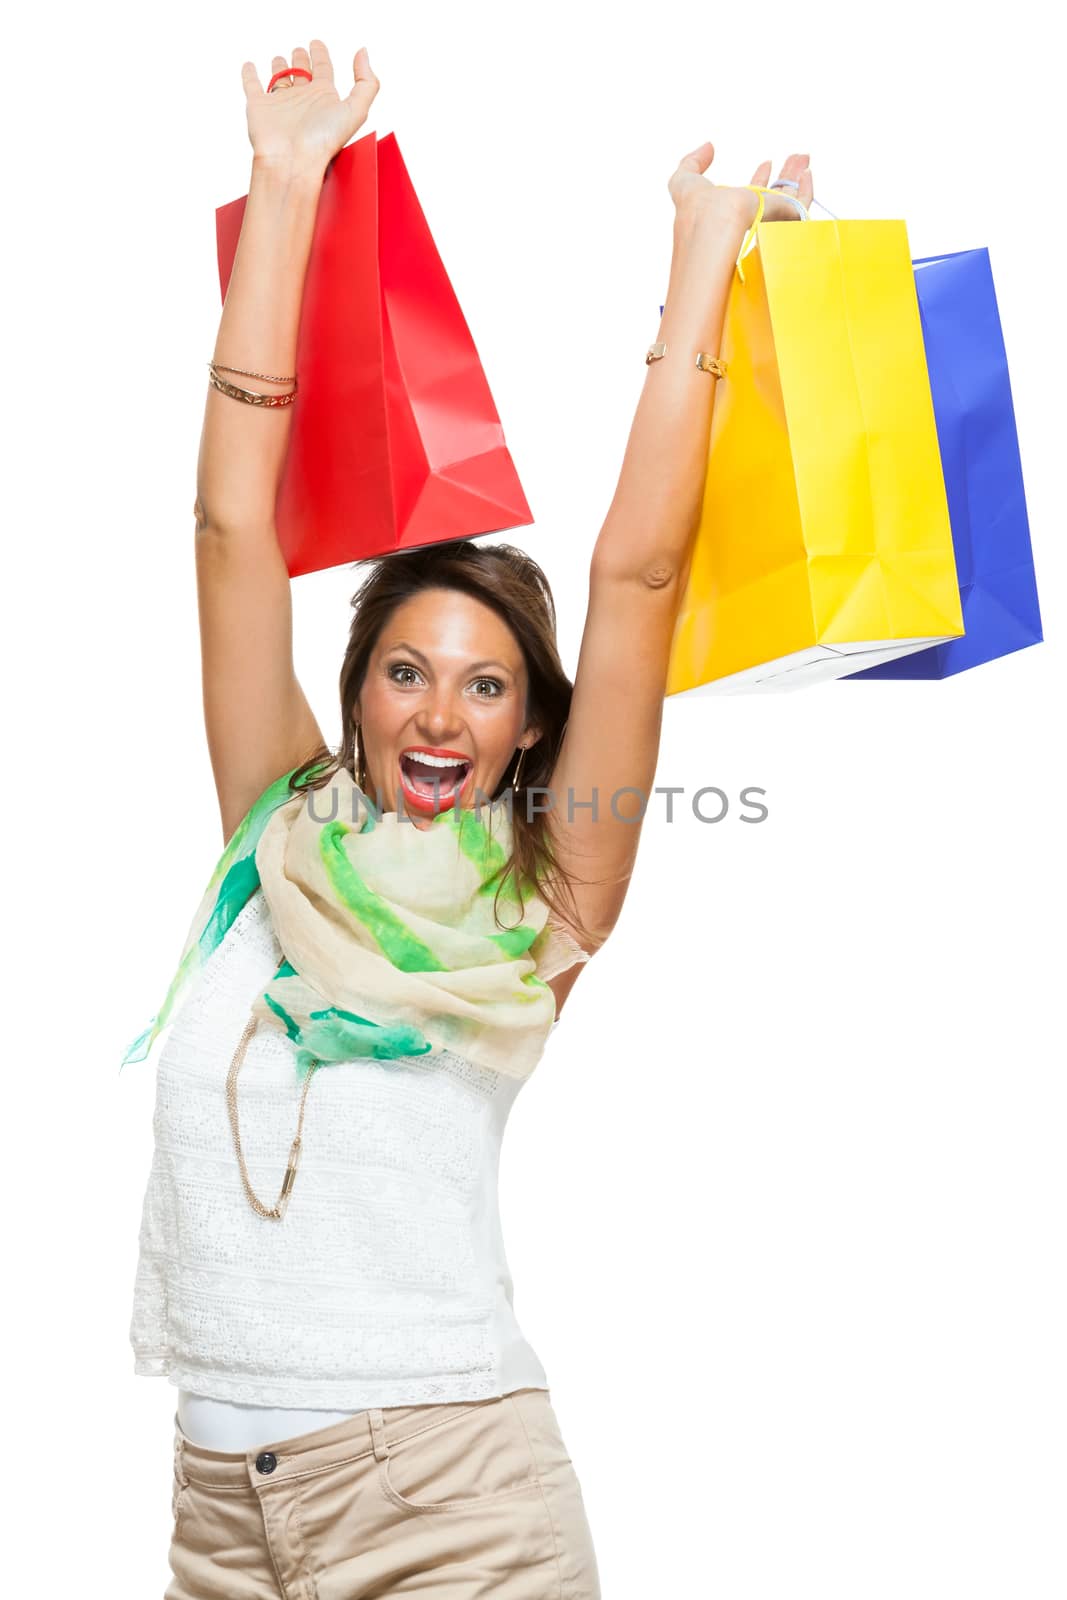 Very Happy Stylish Woman Raising Three Colored Shopping Paper Bag with Mouth Open and Looking at the Camera. Isolated on White Background.